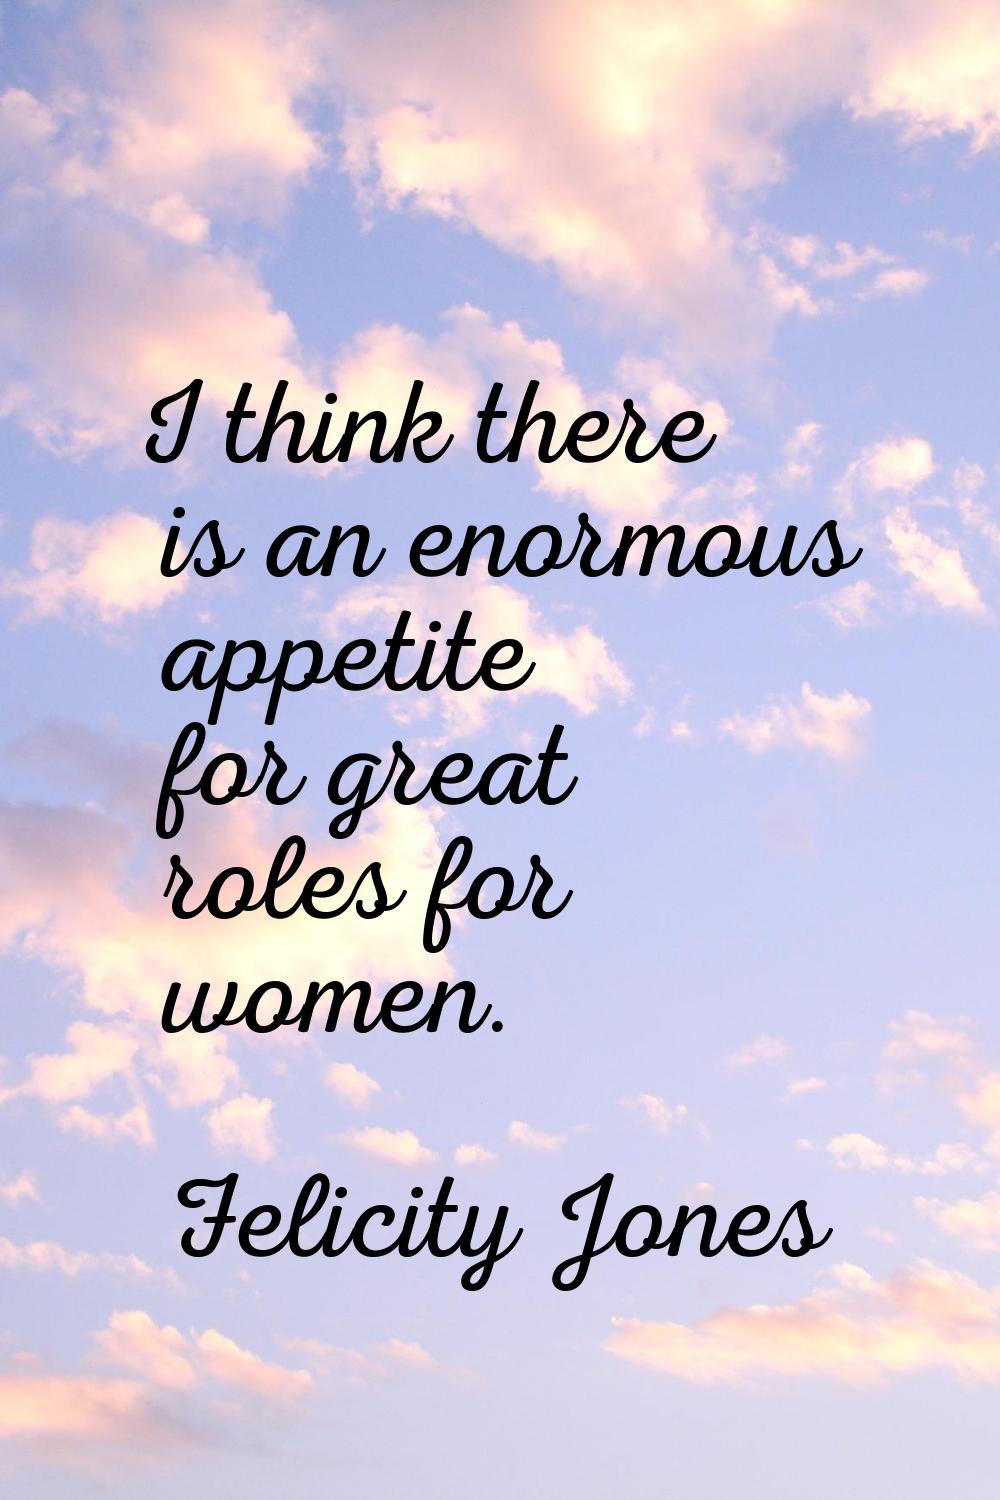 I think there is an enormous appetite for great roles for women.